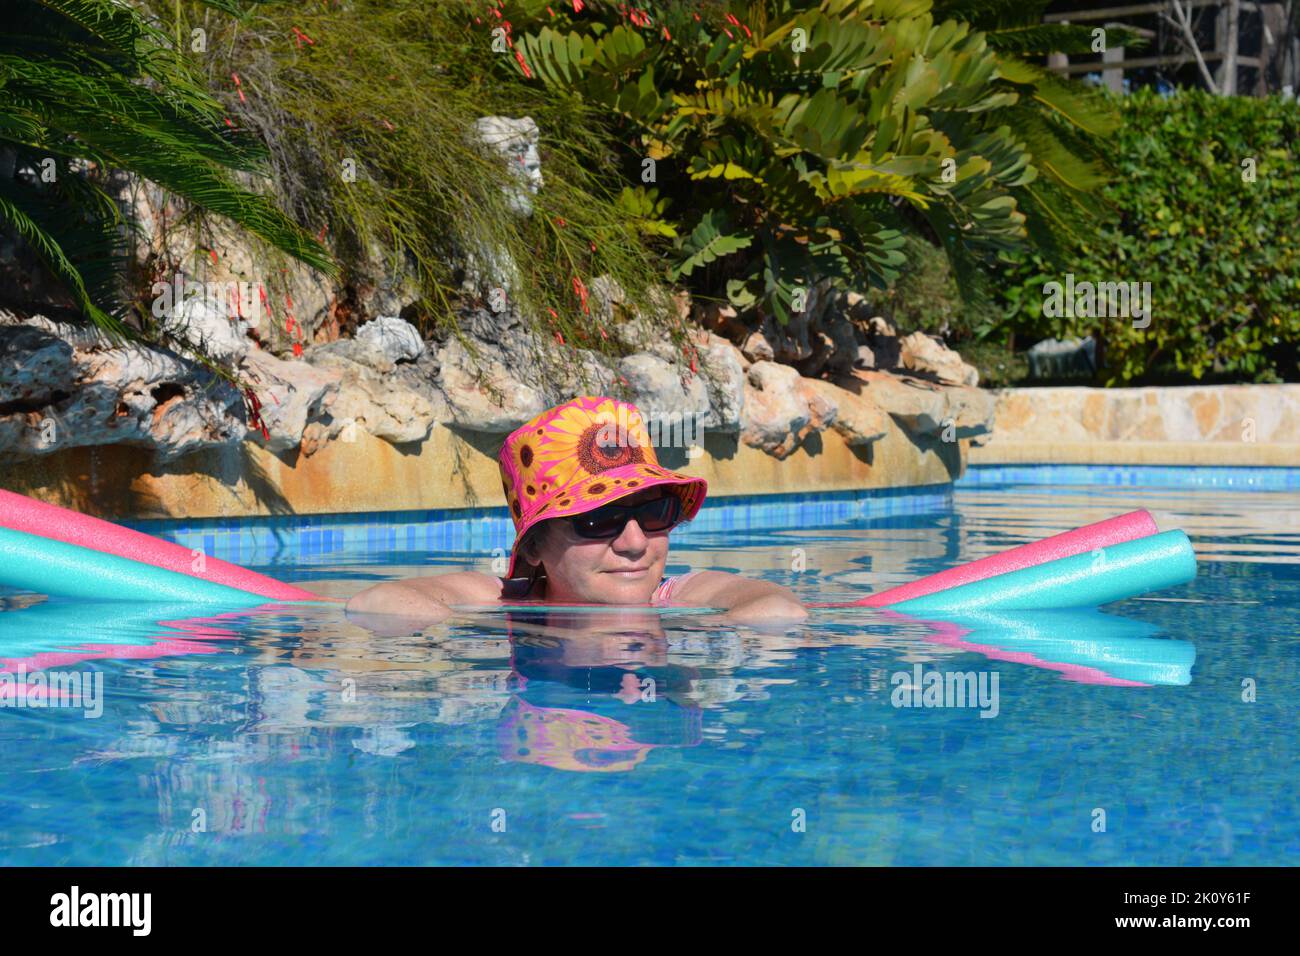 Woman wearing sun hat and shades floating on swim noodles in swimming pool, keeping cool in summer Stock Photo